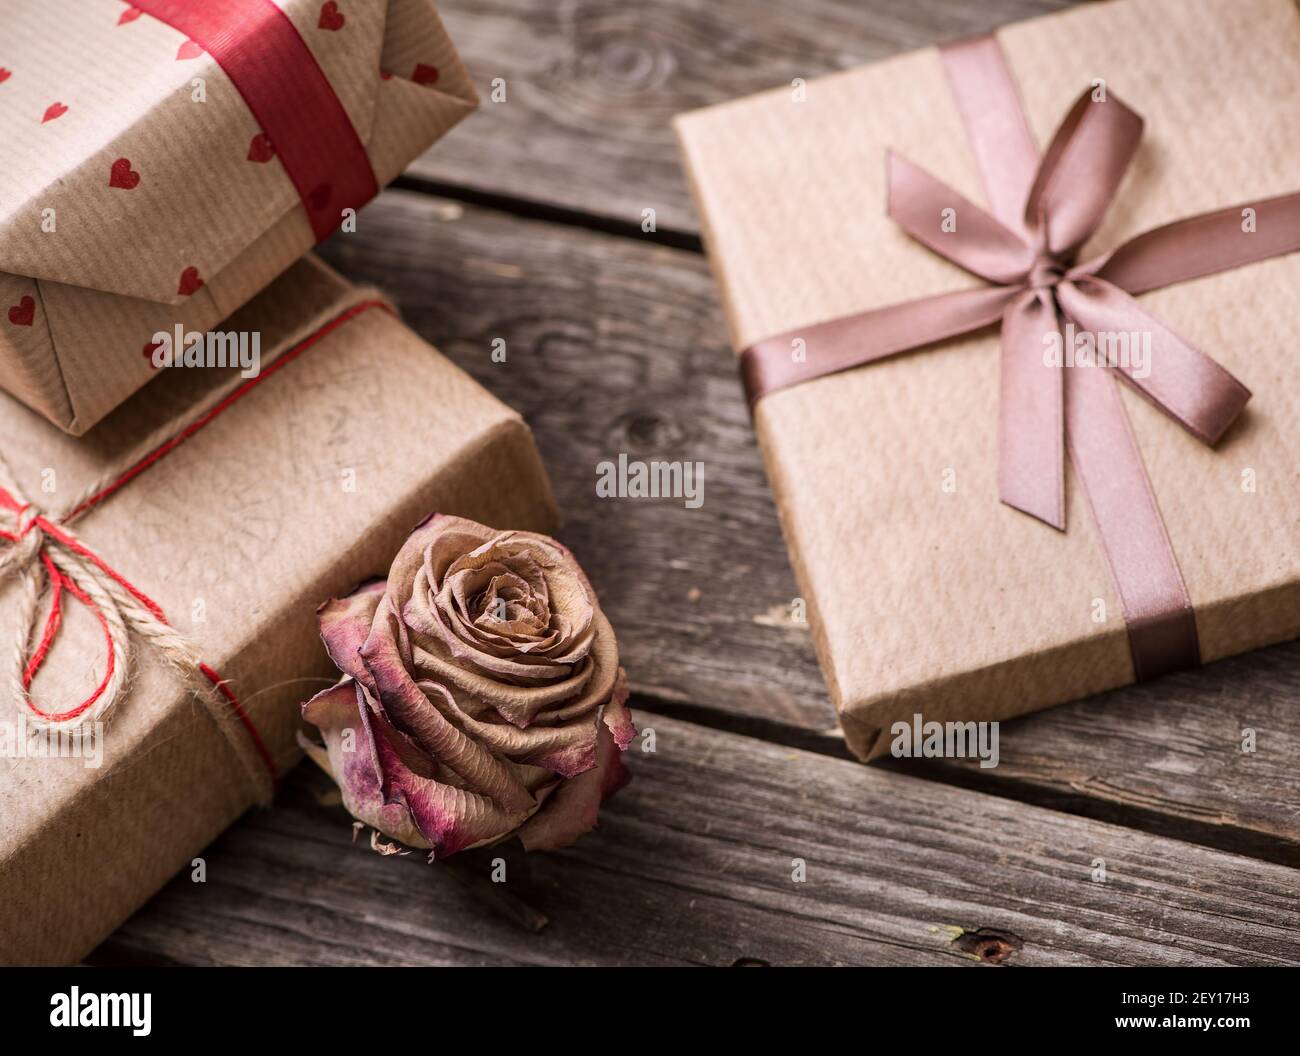 Rose flower among the gift boxes Stock Photo